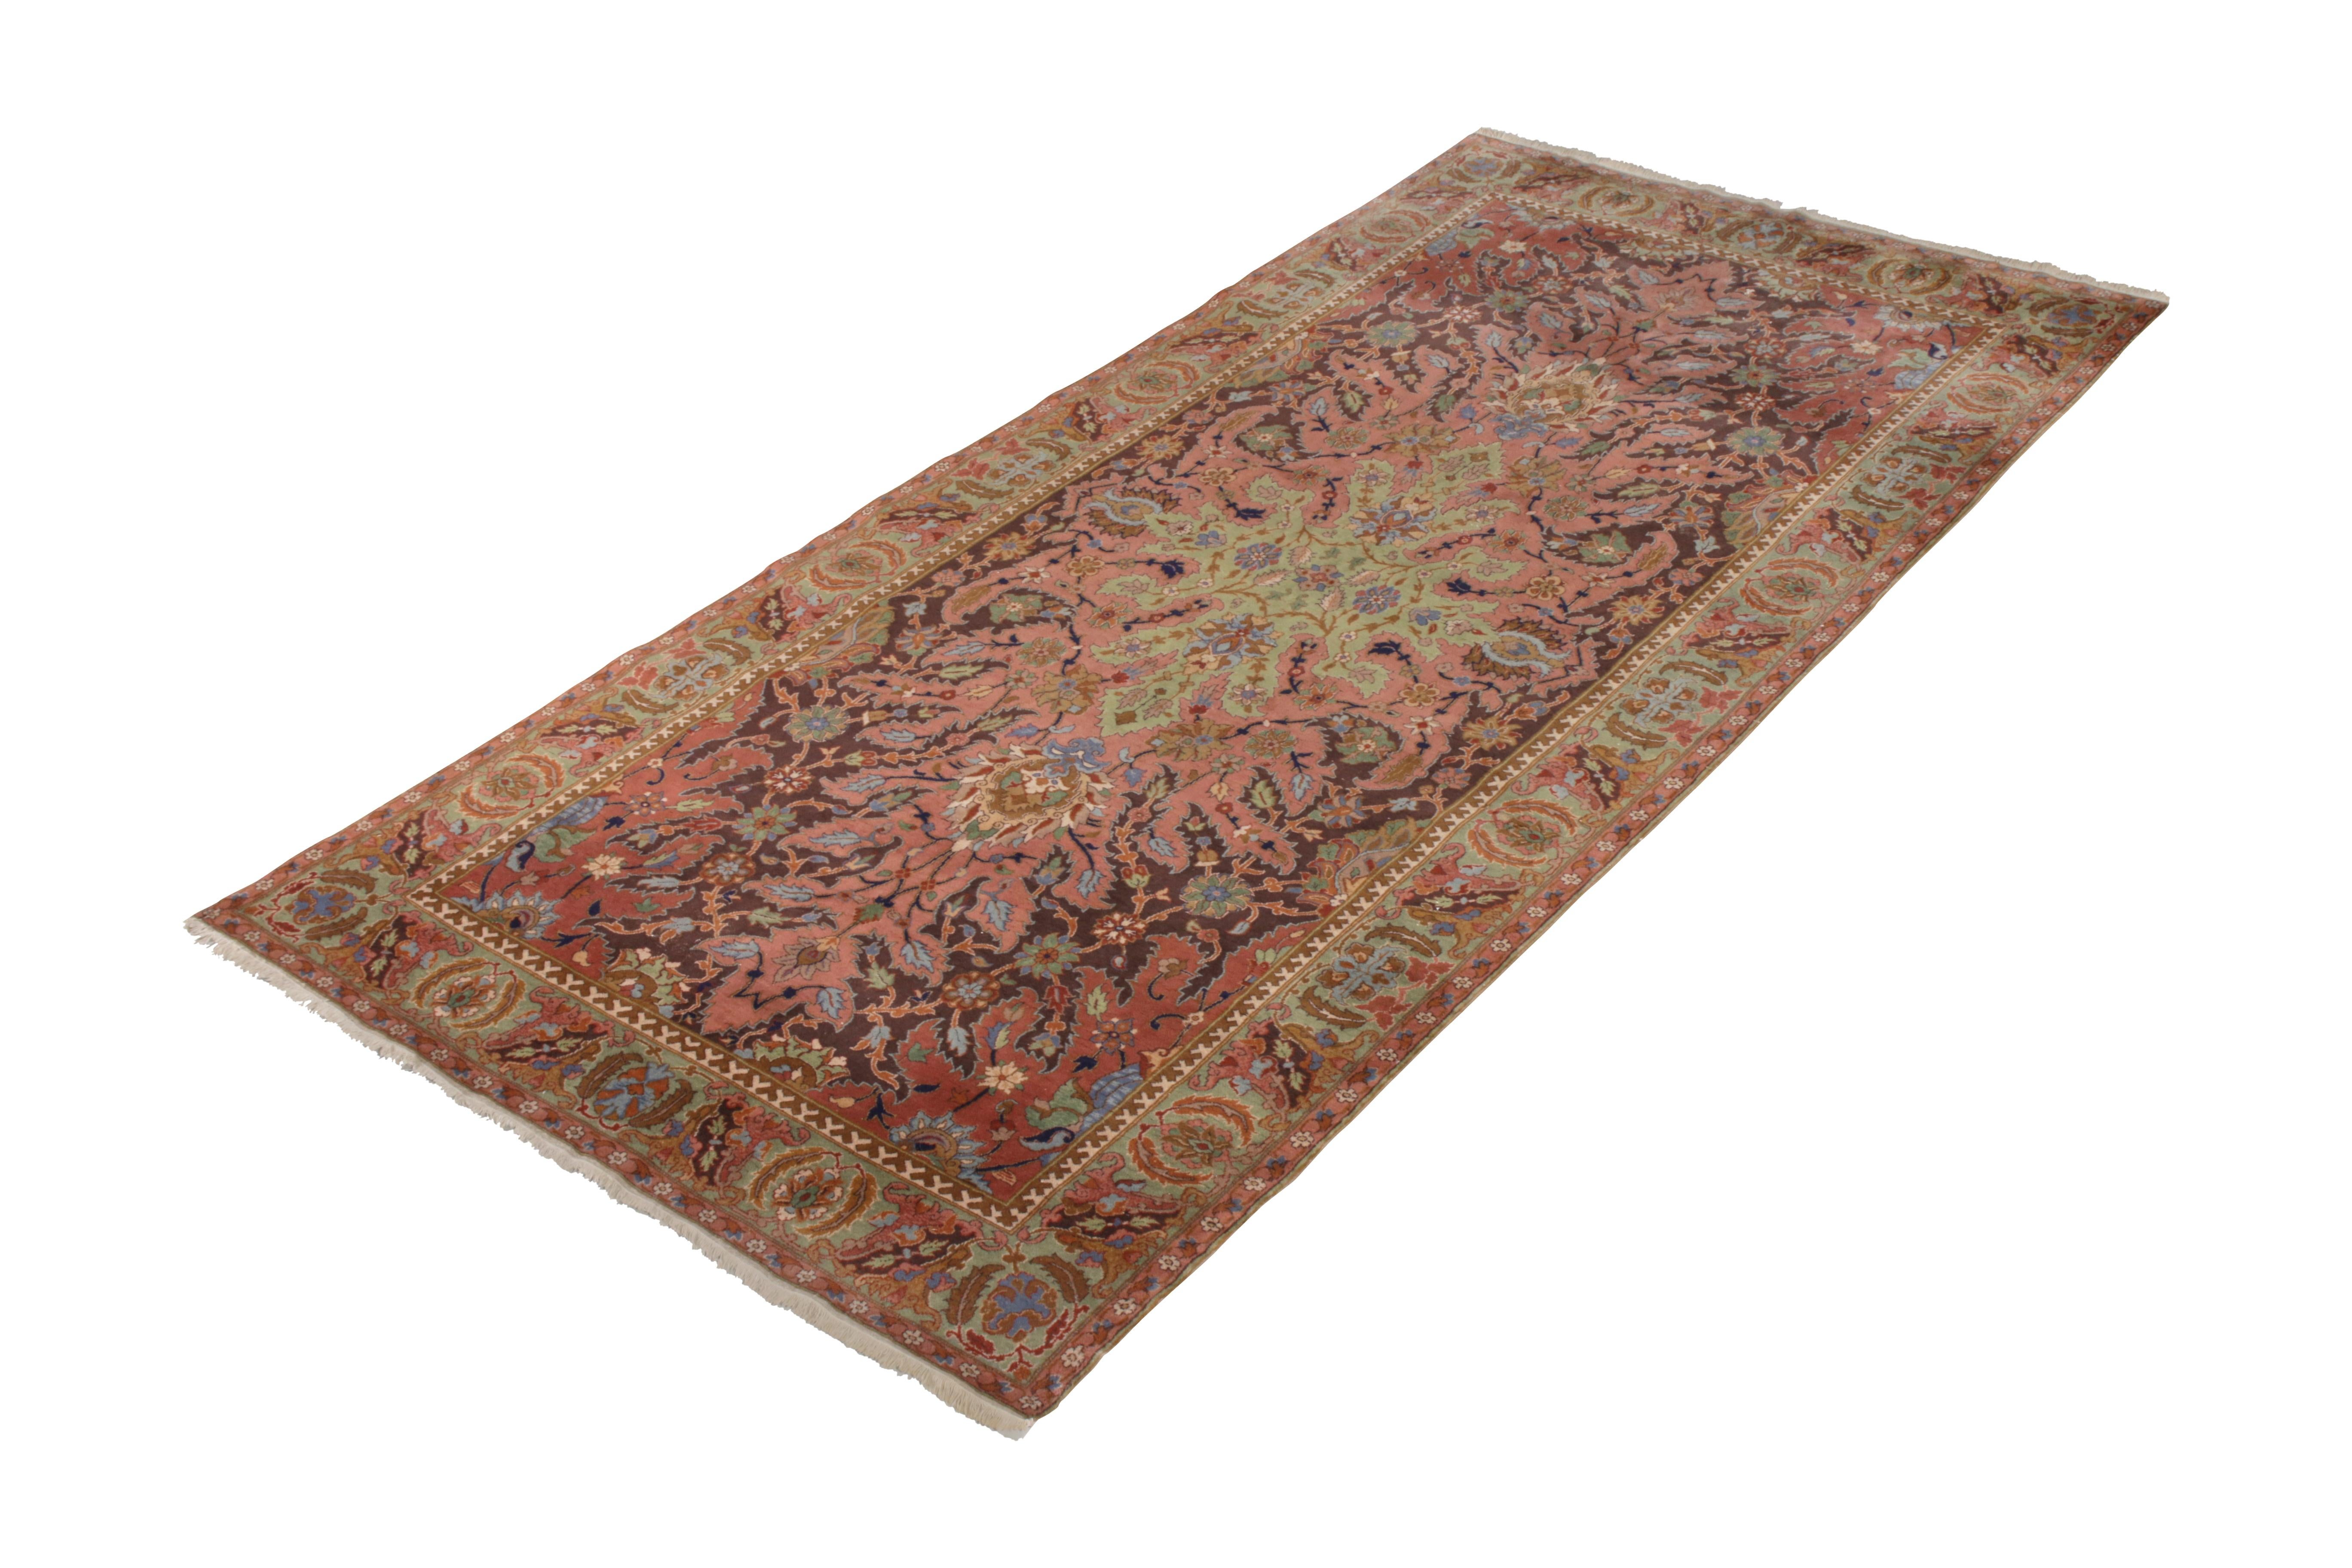 Hand knotted in wool originating from India circa 1910-1920, this spacious 6 x 12 antique rug connotes a rare Polonaise rug design, among the most sought-after lineages of Classic rugs seldom seen in this exceptional condition and vivacious, joyful